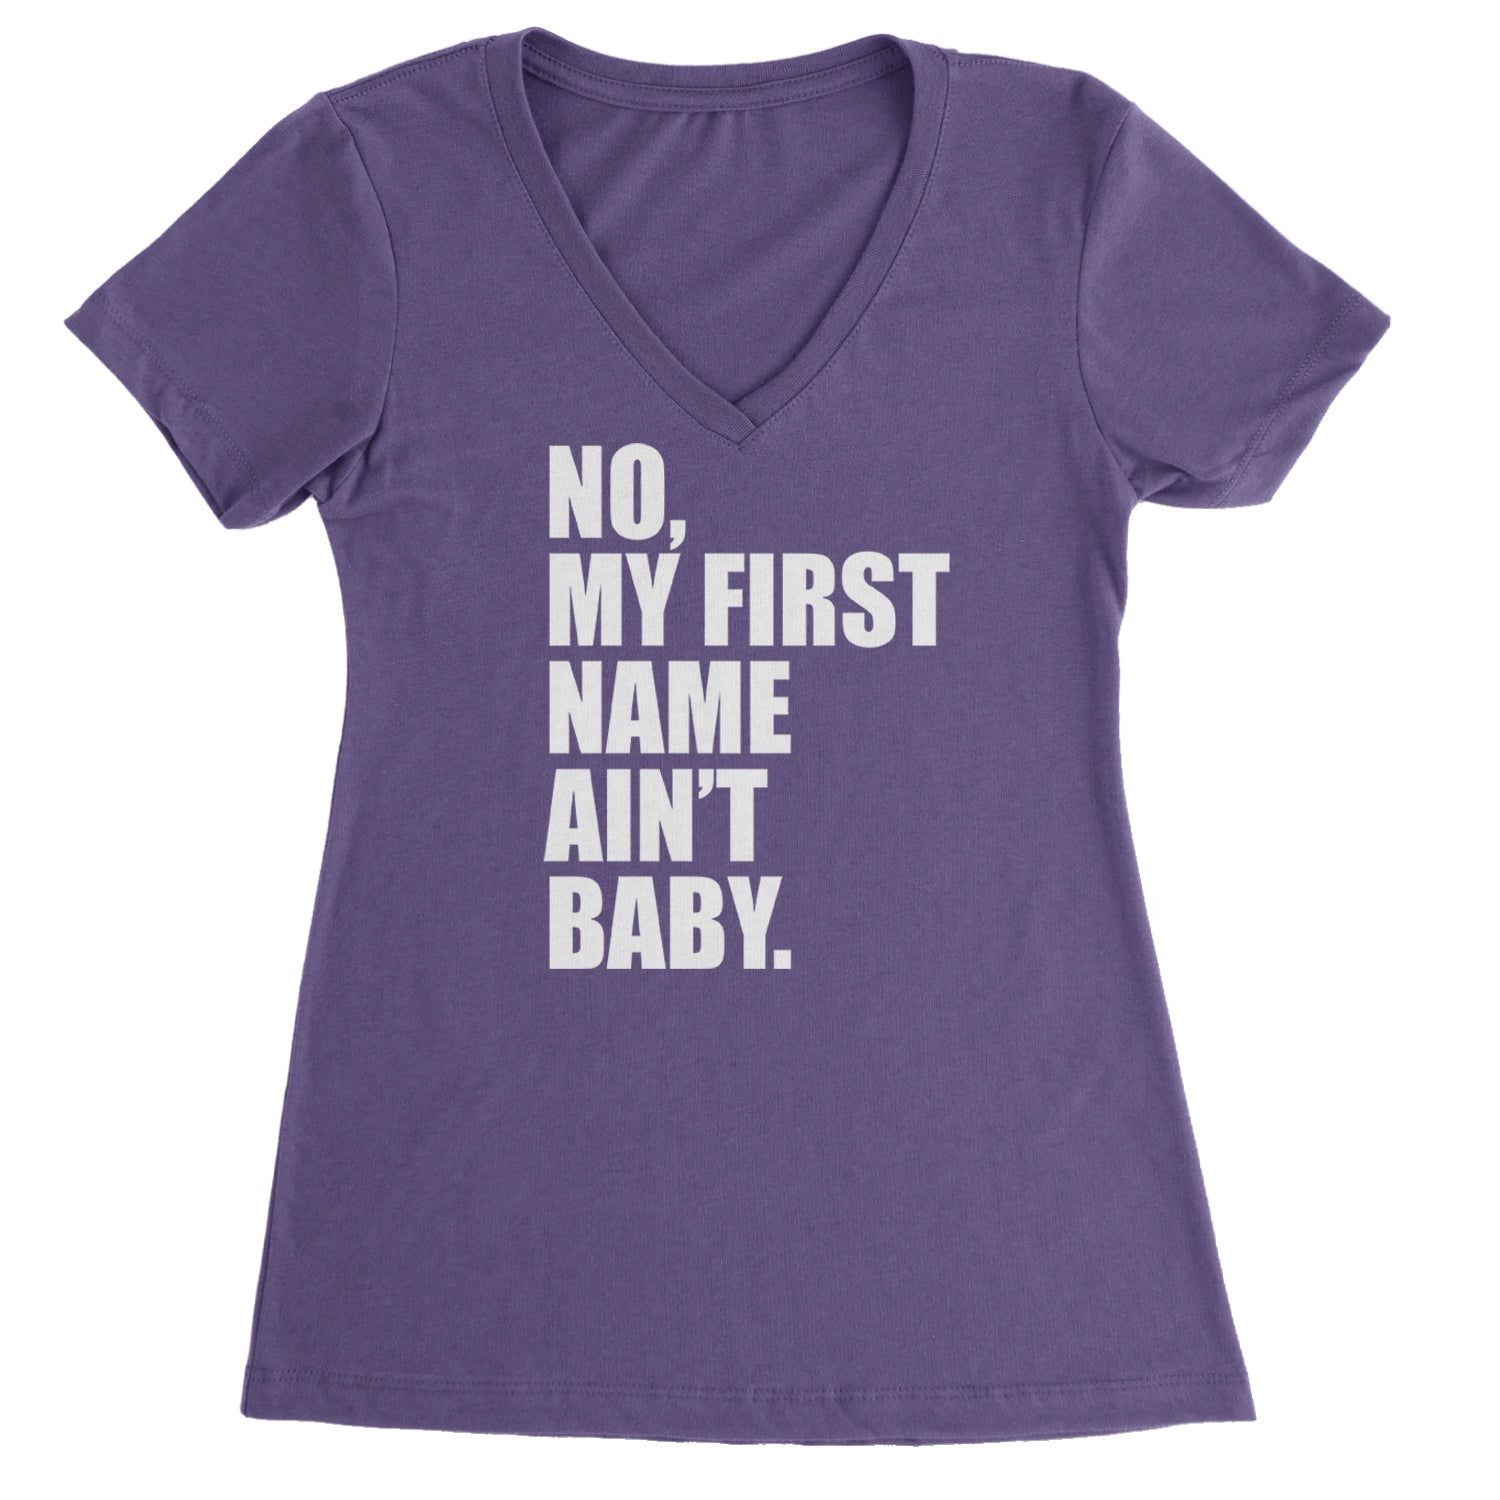 No My First Name Ain't Baby Together Again Ladies V-Neck T-shirt Purple